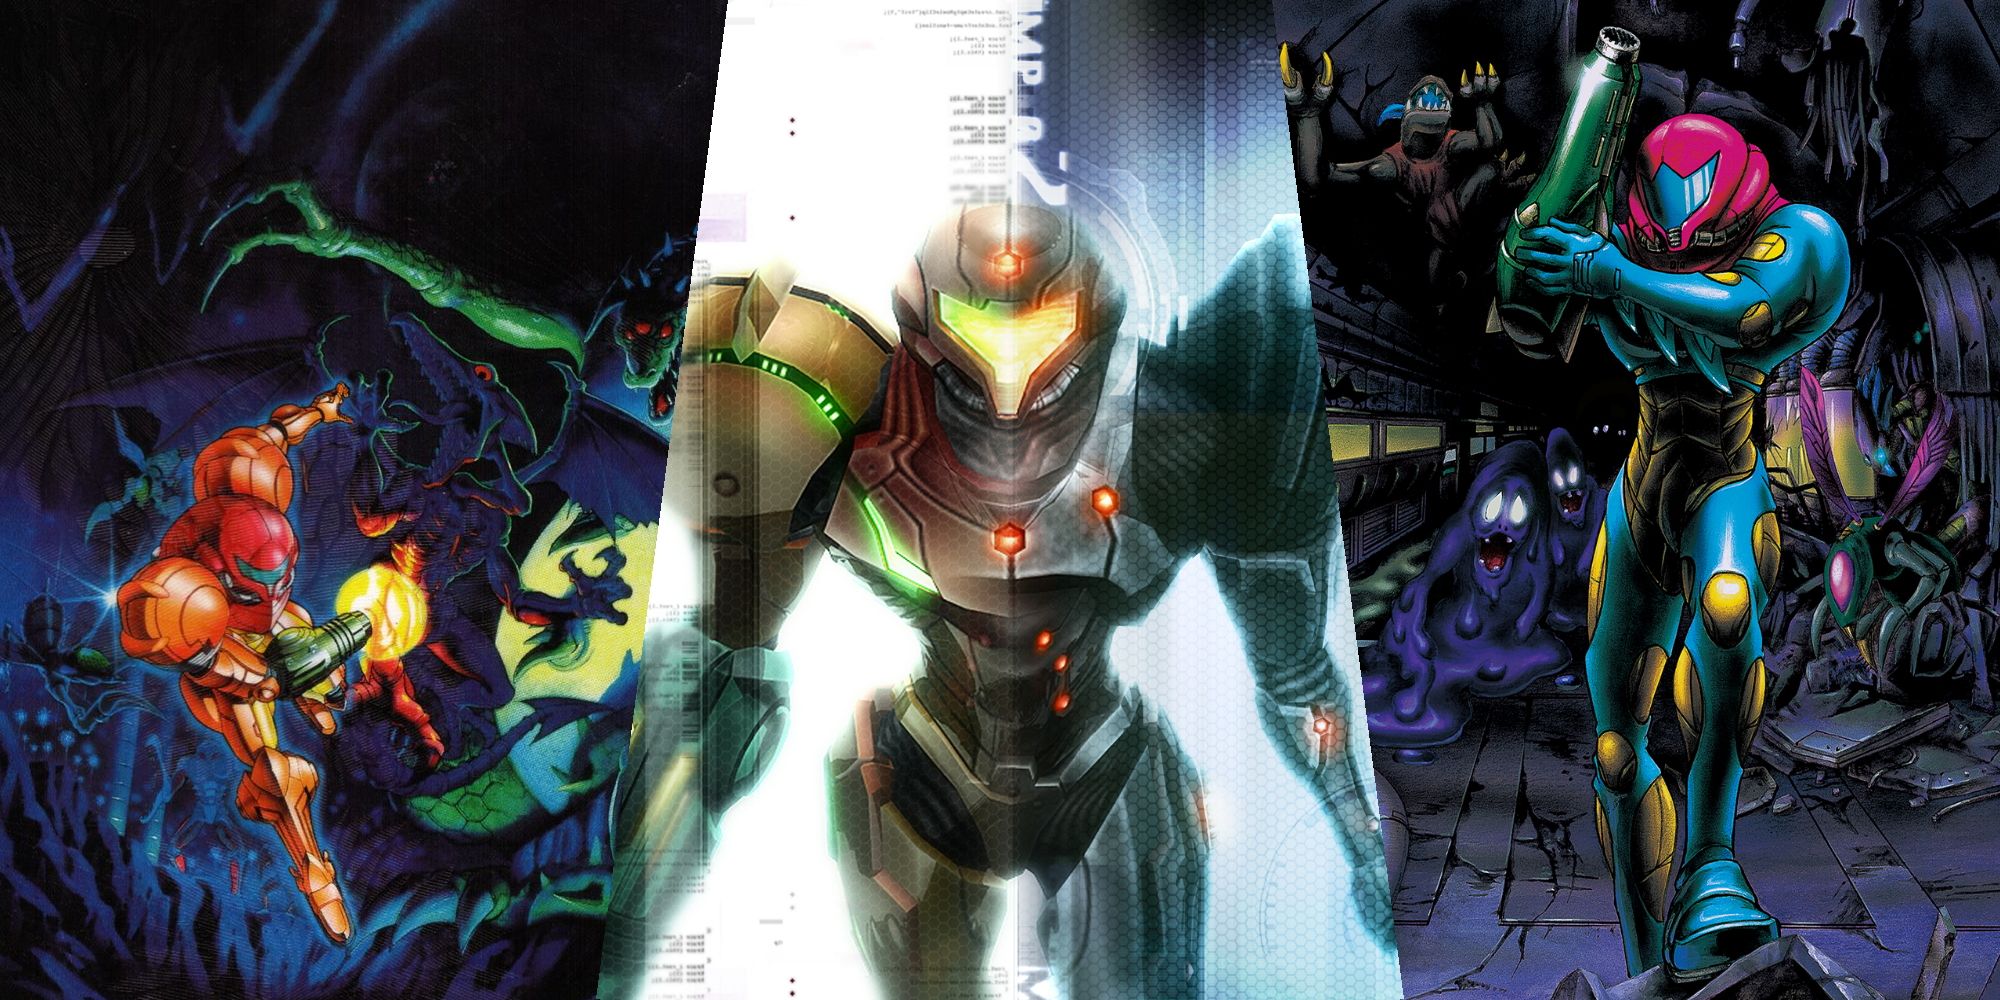 Metroid Suit Featured Image (with art taken from Super Metroid, Metroid Prime 2, and Metroid Fusion)